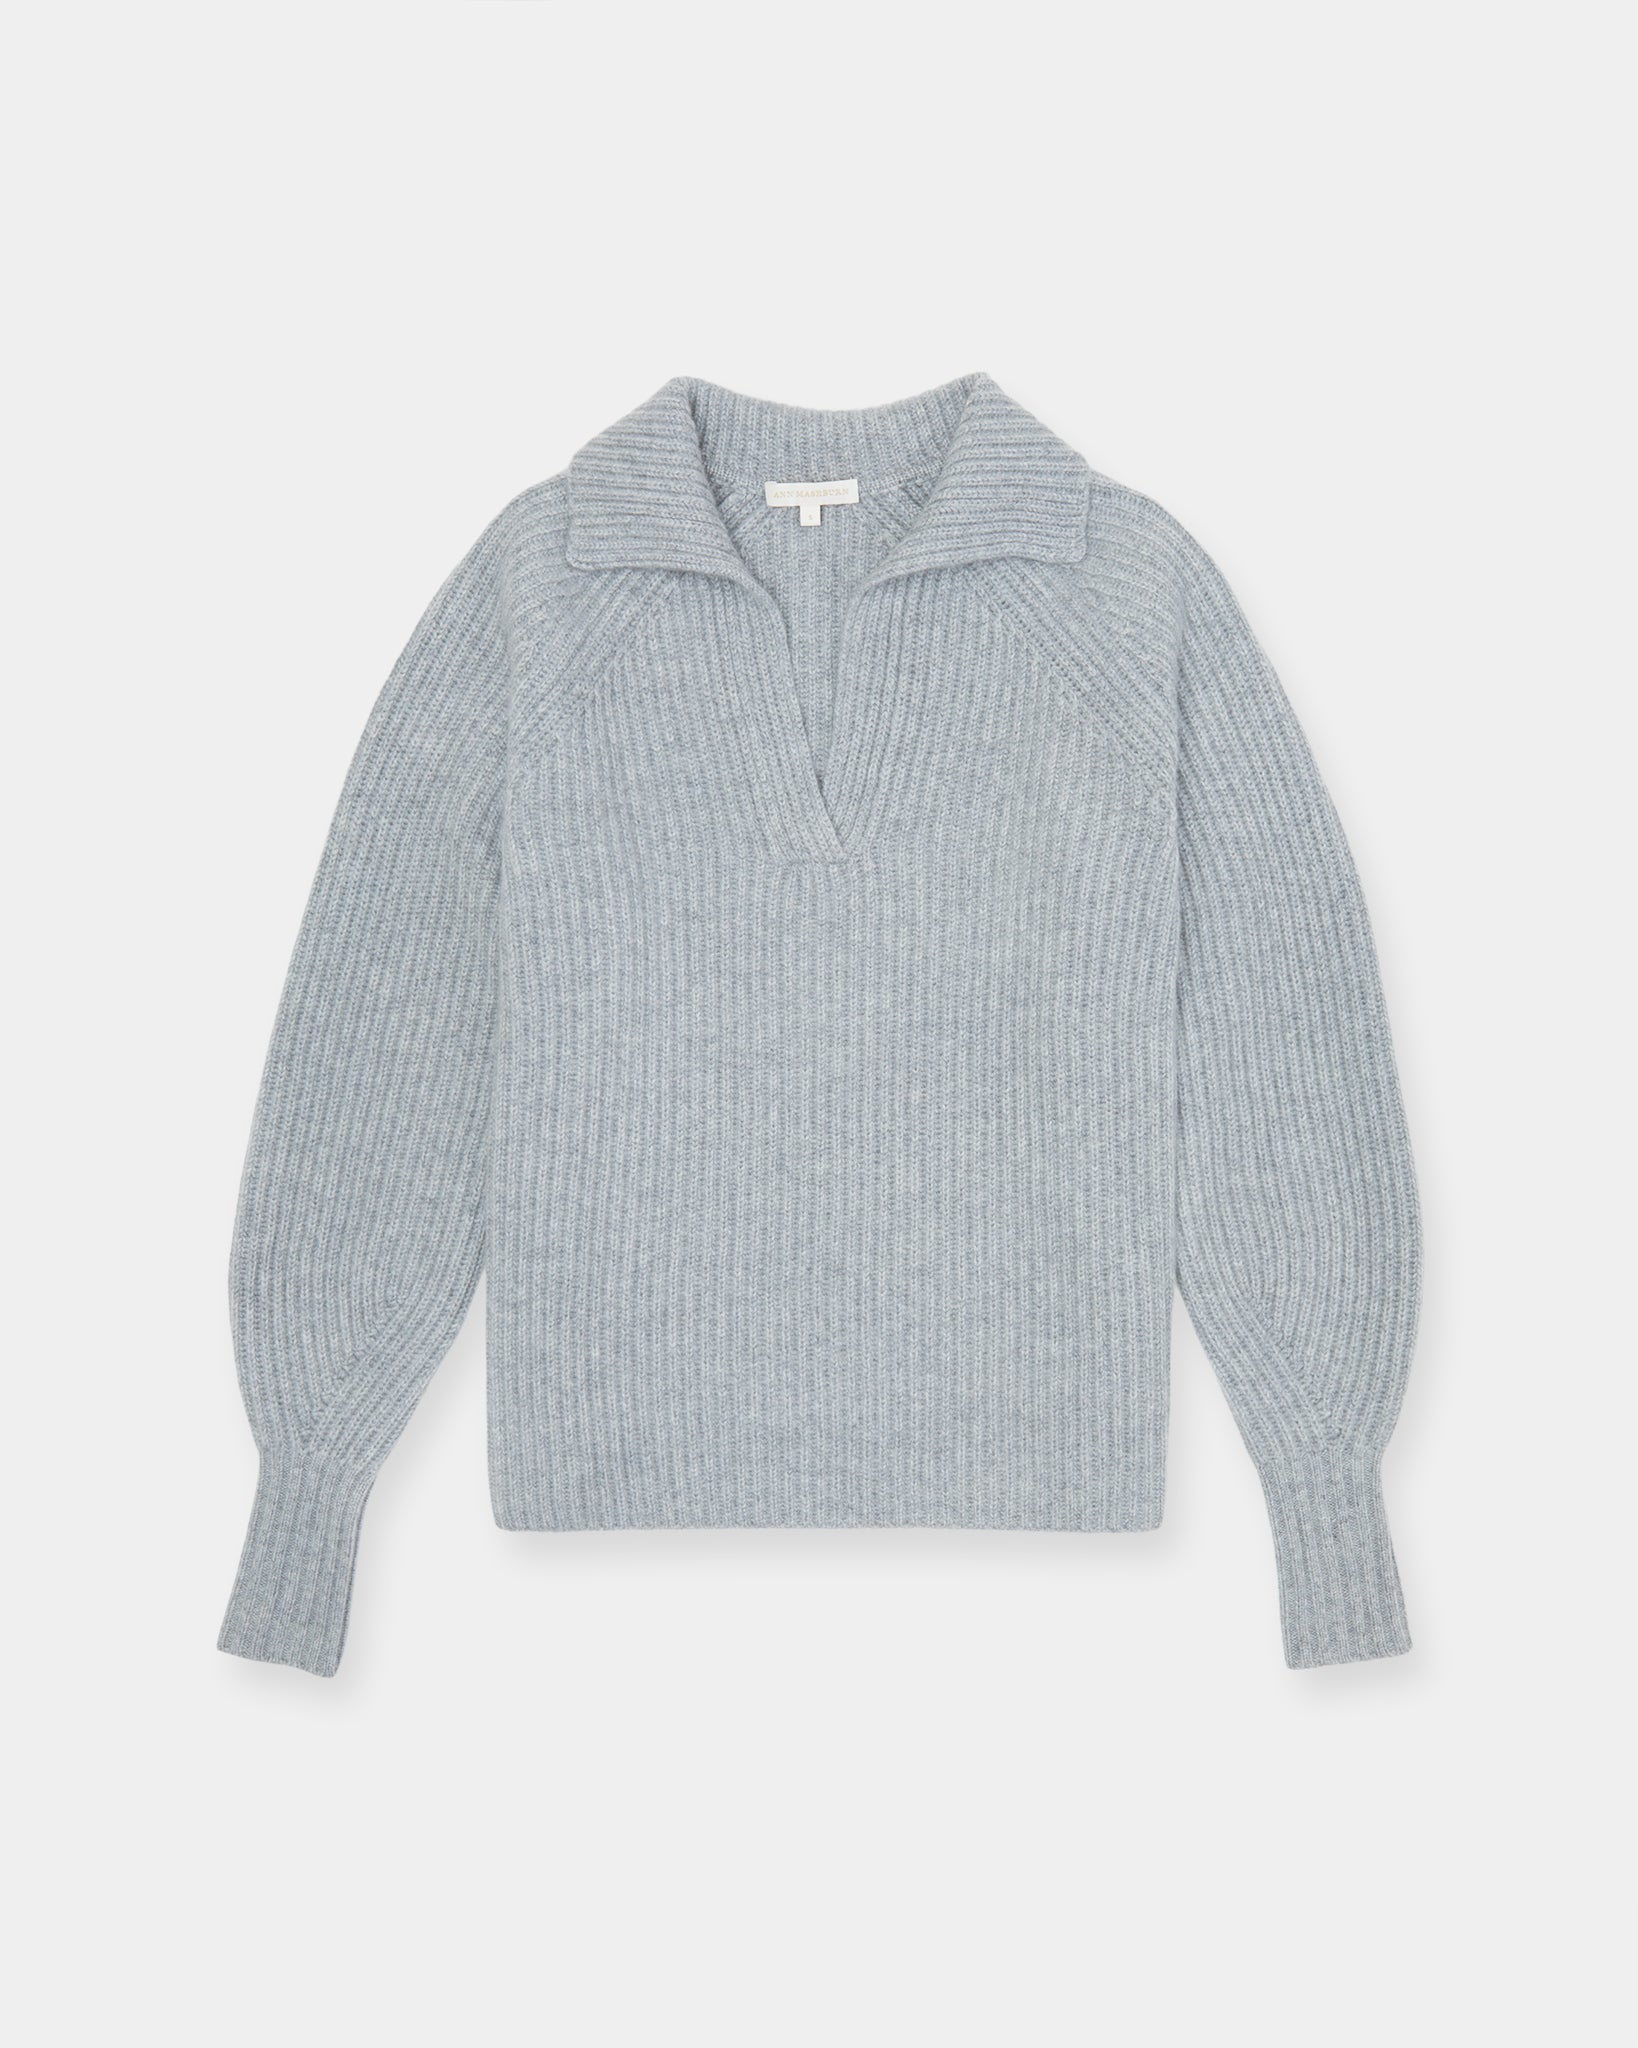 Blaire Johnny-Collar Shaker Sweater in Heather Grey Cashmere